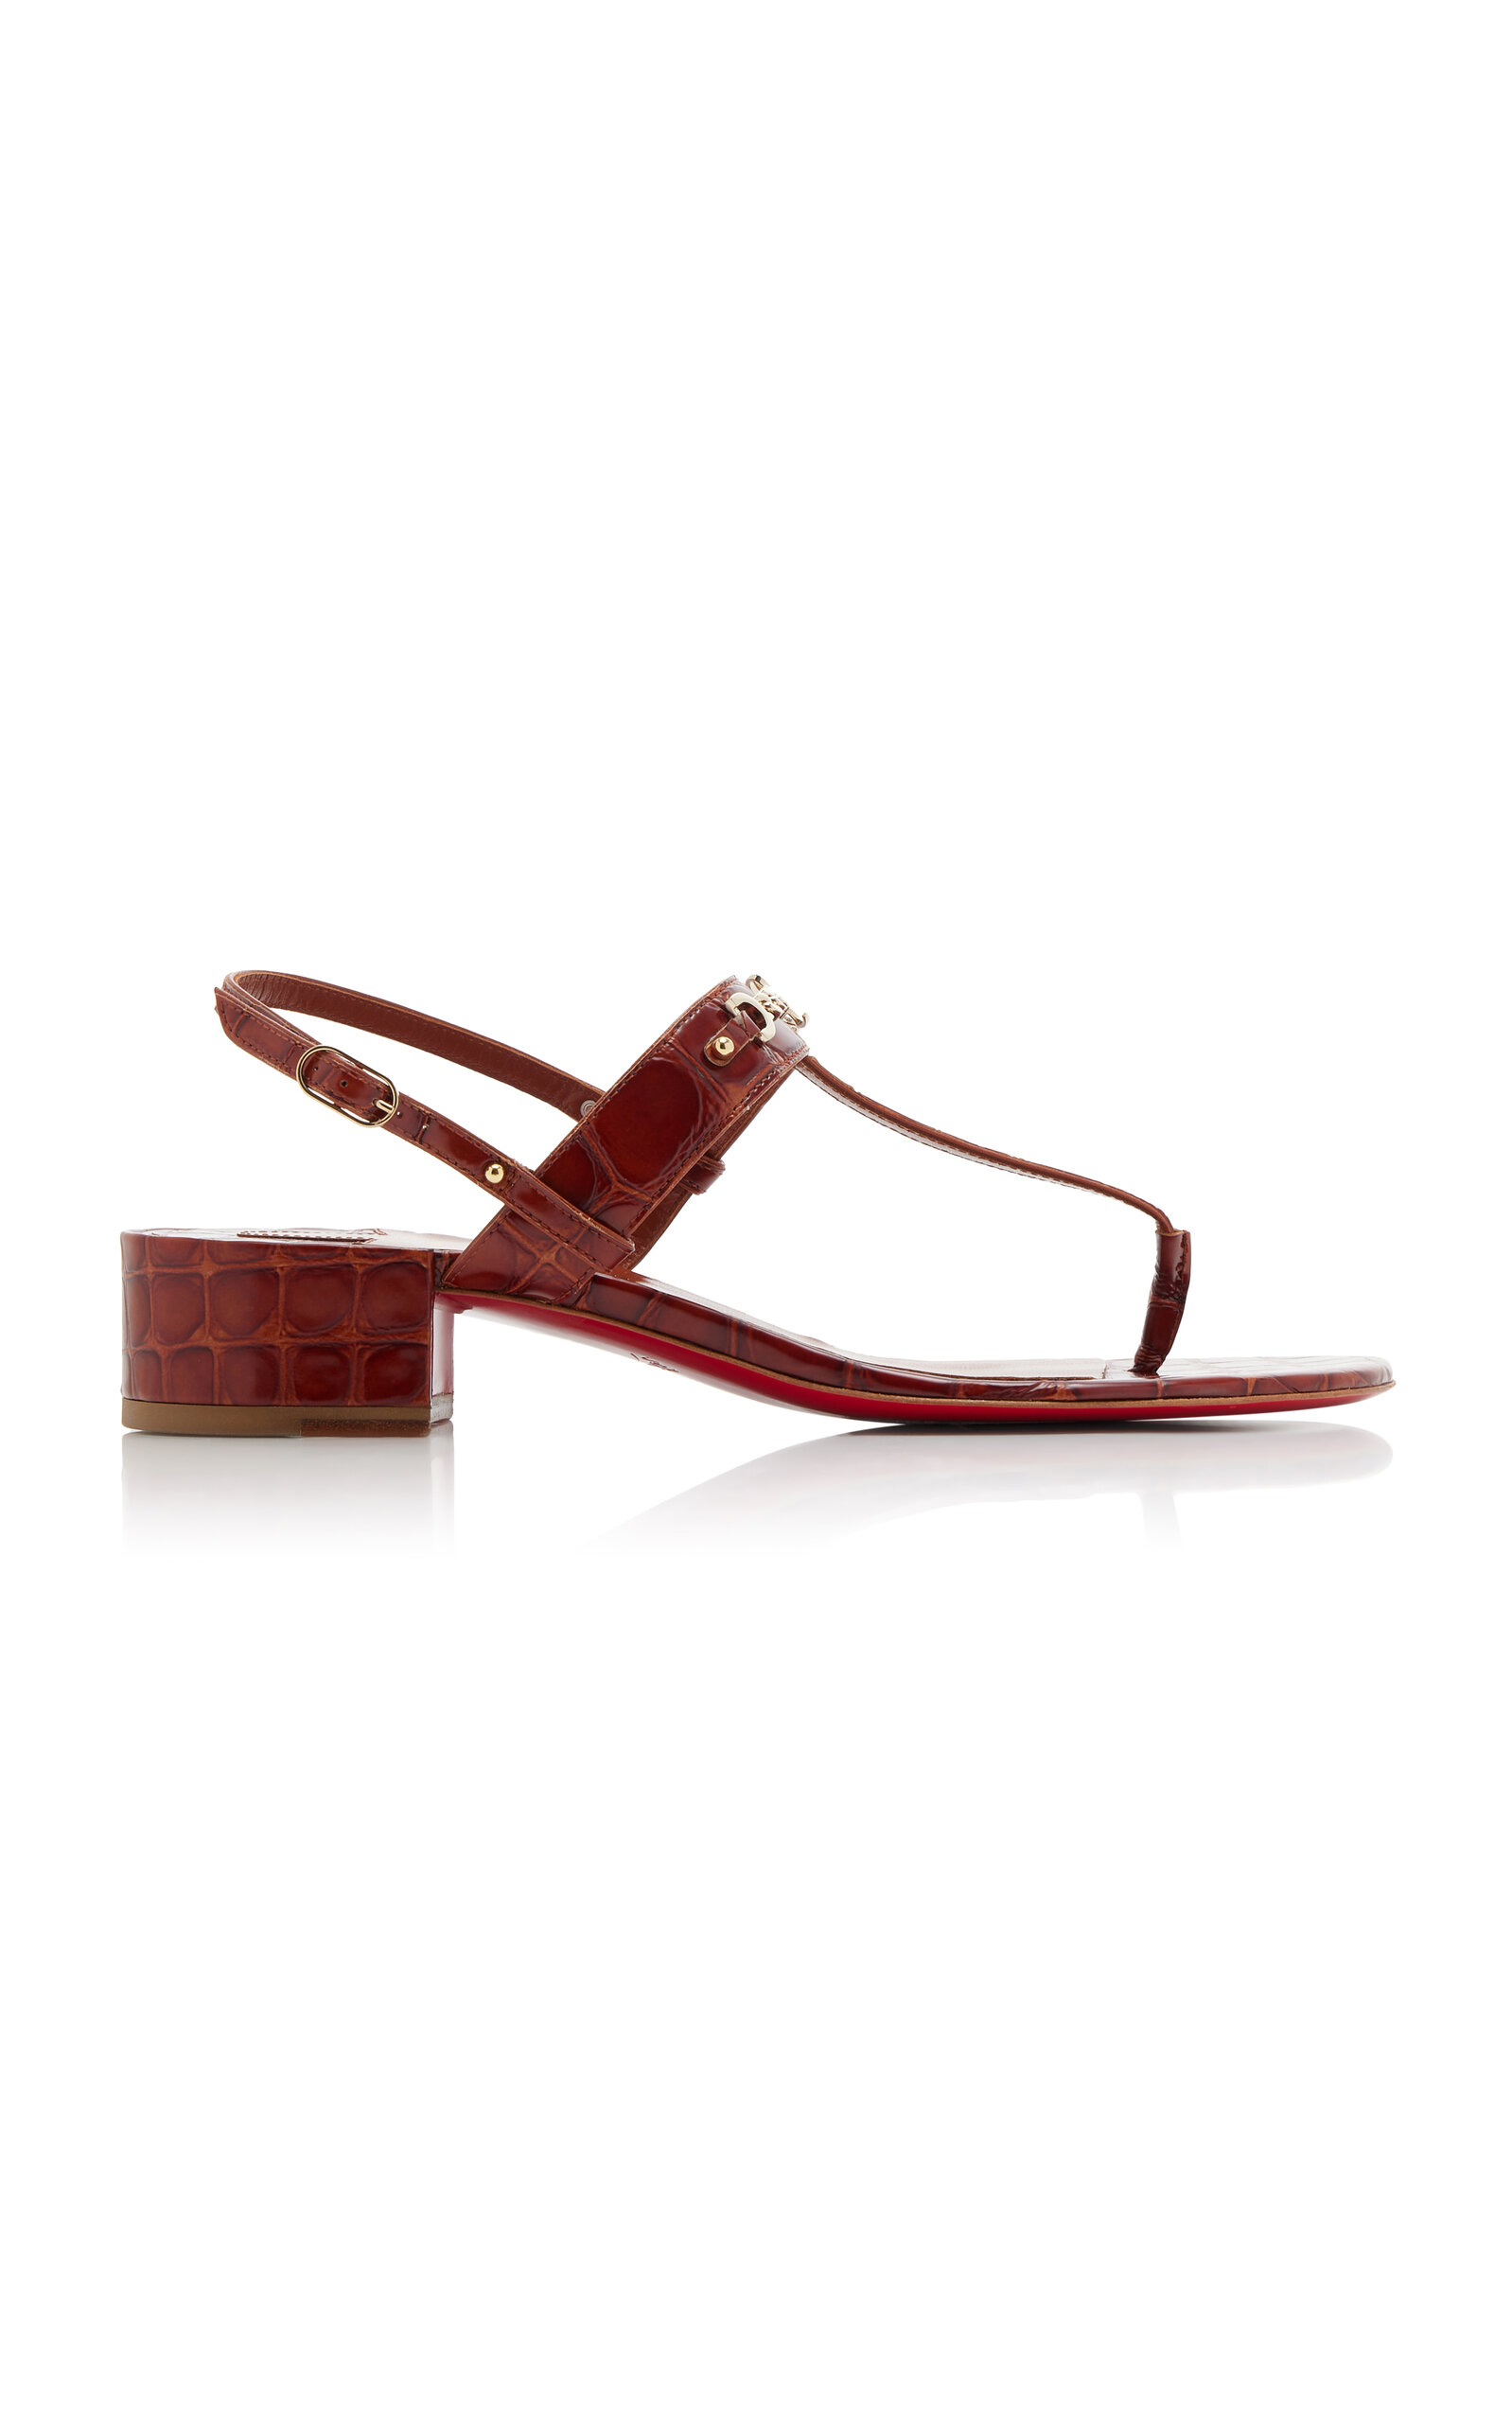 MJ Thong 25mm Croc-Embossed Leather Sandals